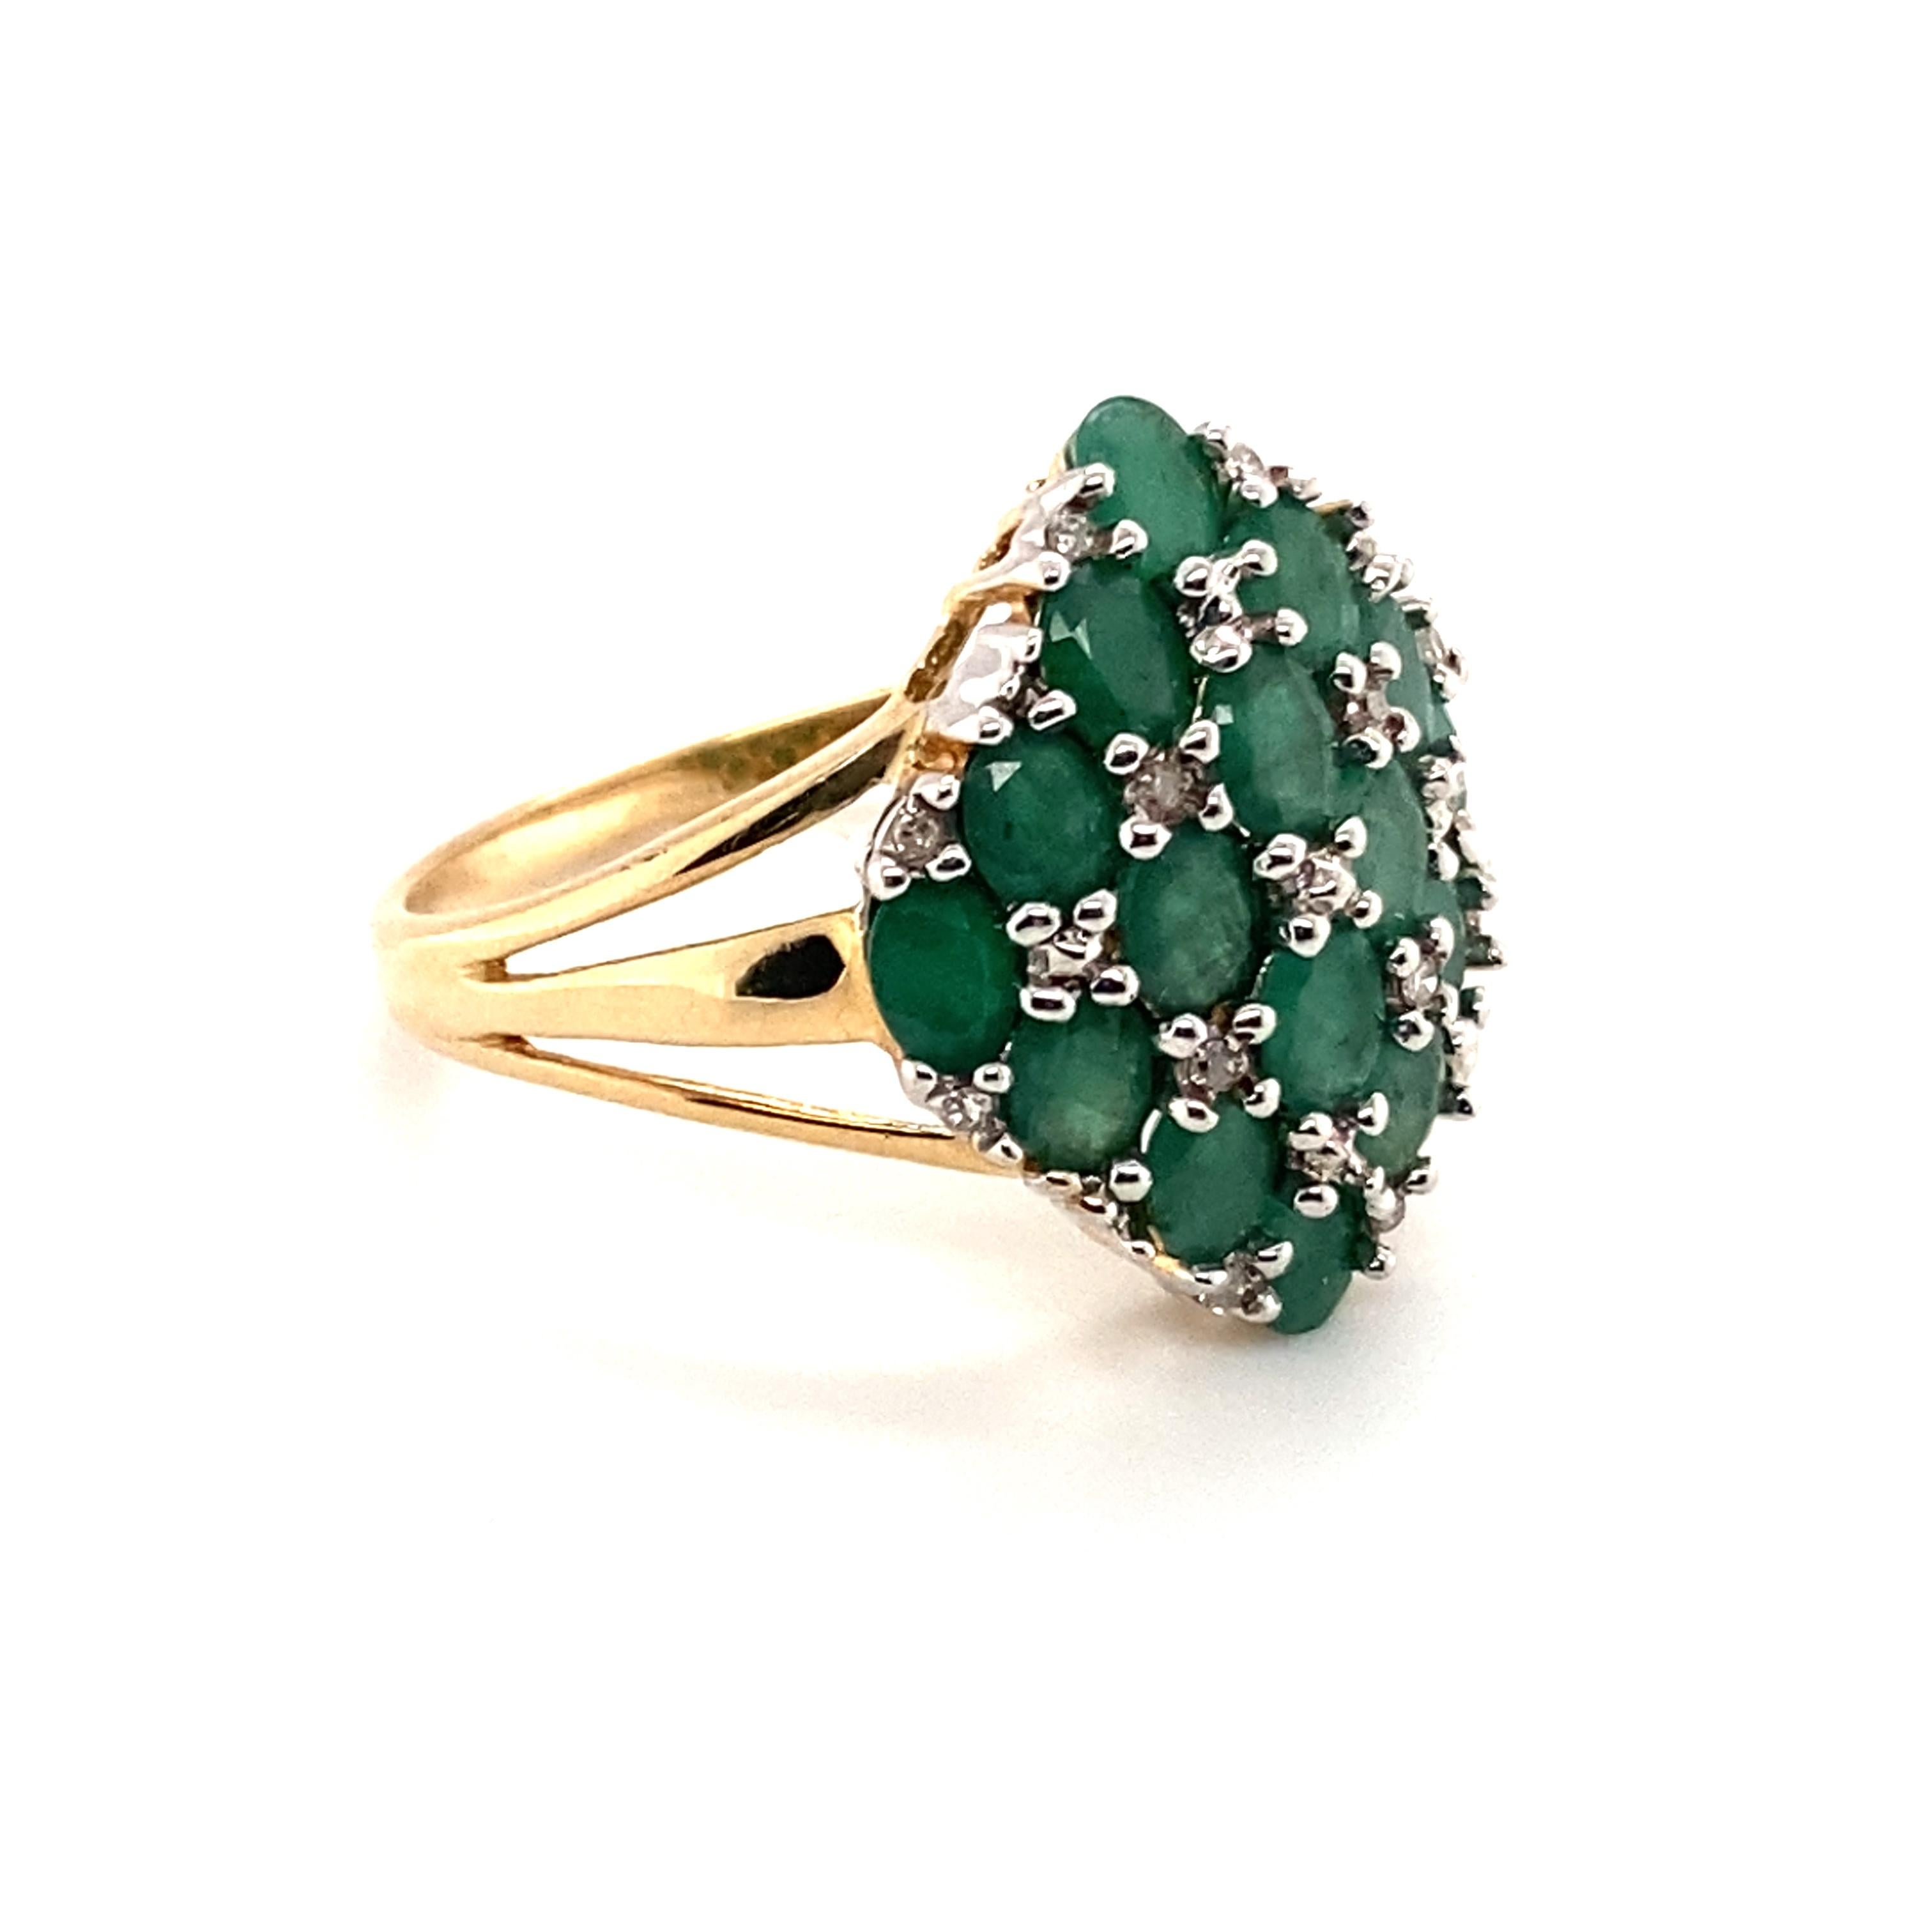 Item Features:
Gemstone: Emerald and Diamond
Metal: 14 Karat Yellow Gold 
Size: 10, sizable
Weight: 4.3 grams

Emerald Details:
Cut: Oval
Carat: 1.92 carats 
Color: Deep Green 

Diamond Details:
Carat: 0.06 carats total weight
Cut: Round 
Color: